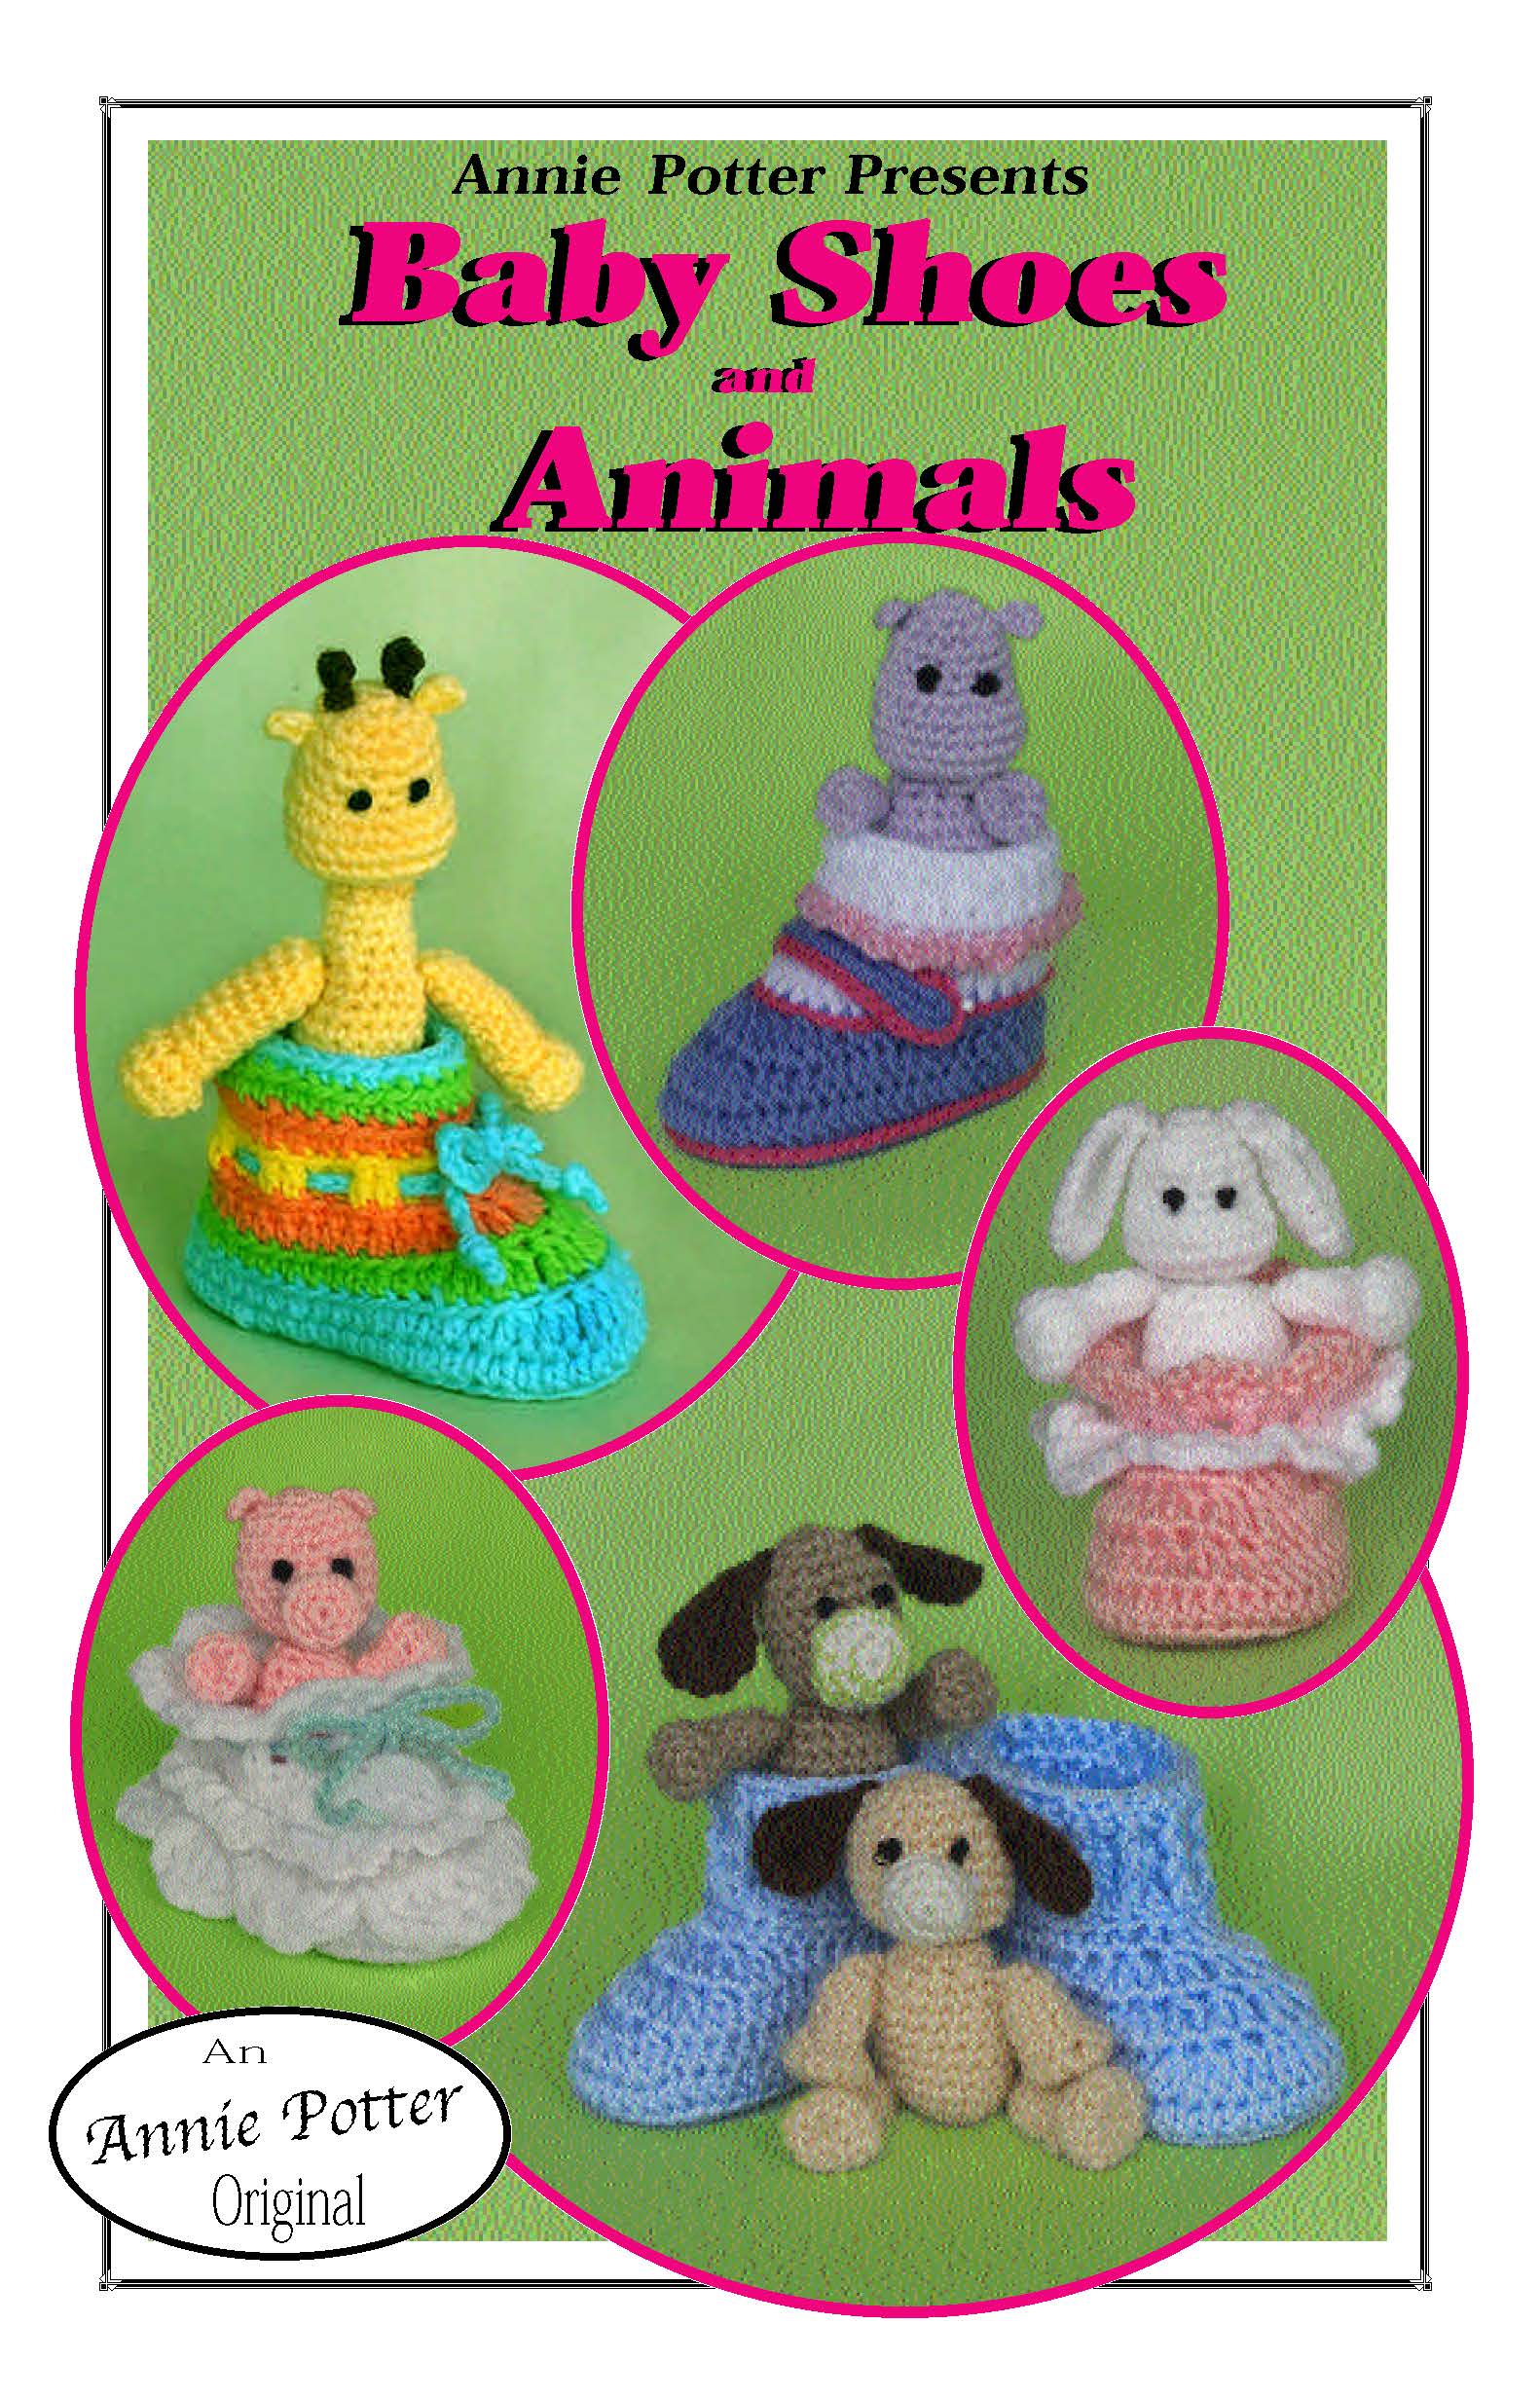 Infant Crochet Shoes, bunny slippers pattern, Baby booties crochet pattern, Hippo shoes pattern, Baby Shoes and Animals, PDF- Annie Potter's Yarn Basket